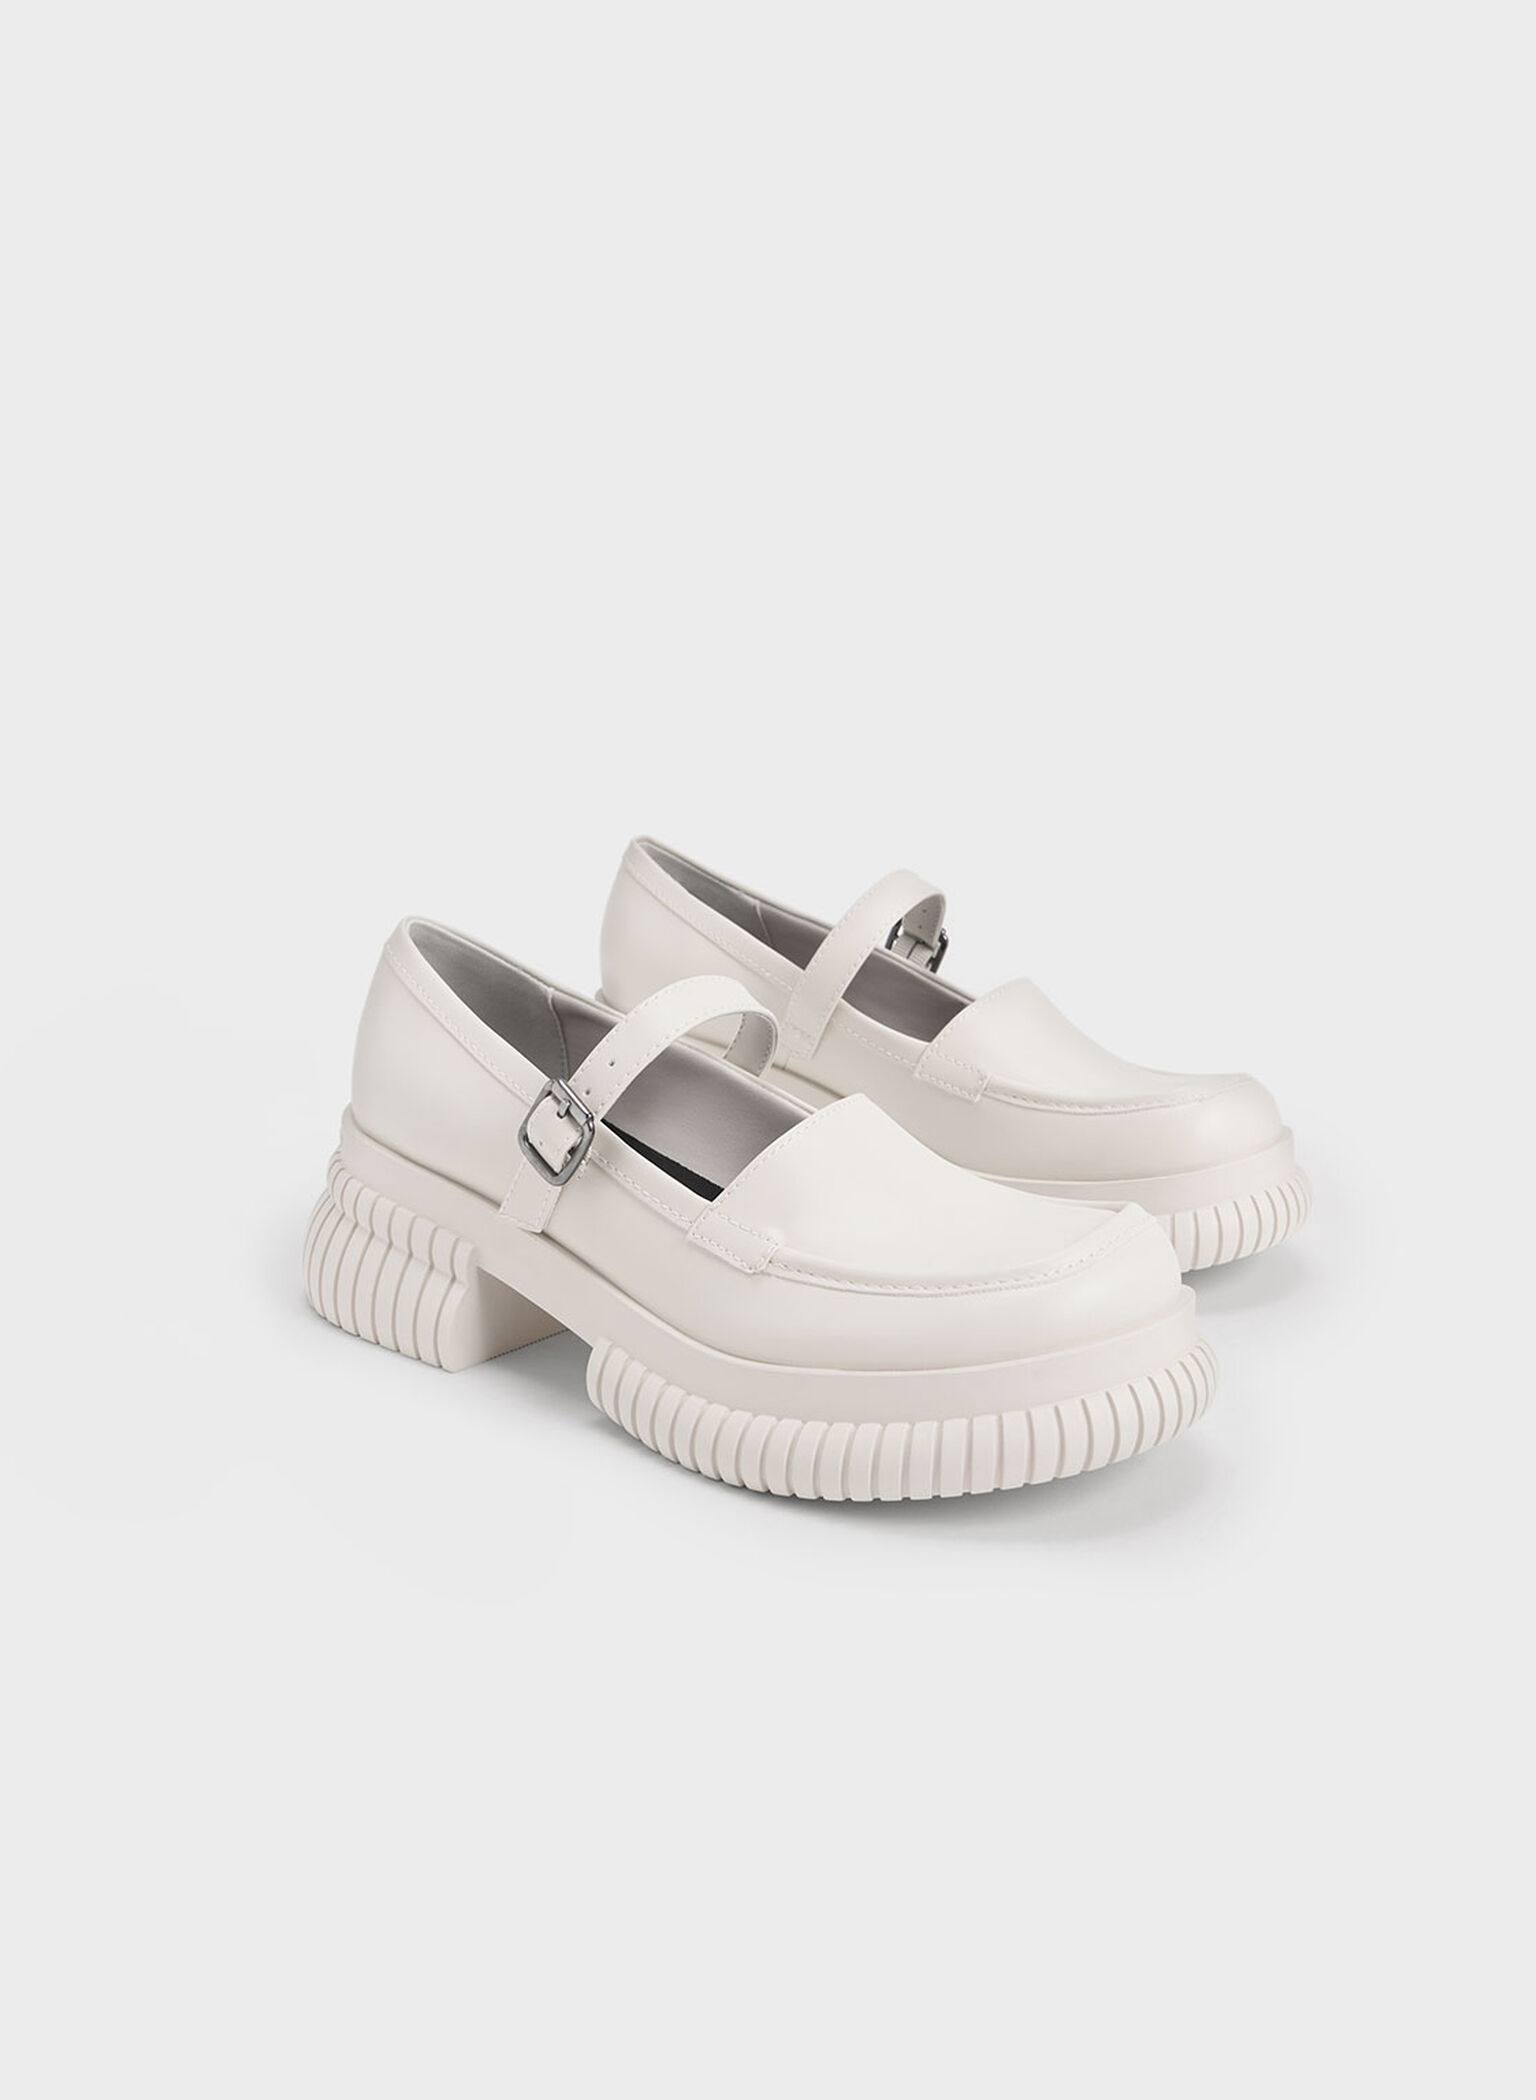 Chalk Buckled Mary Jane Loafers - CHARLES & KEITH US